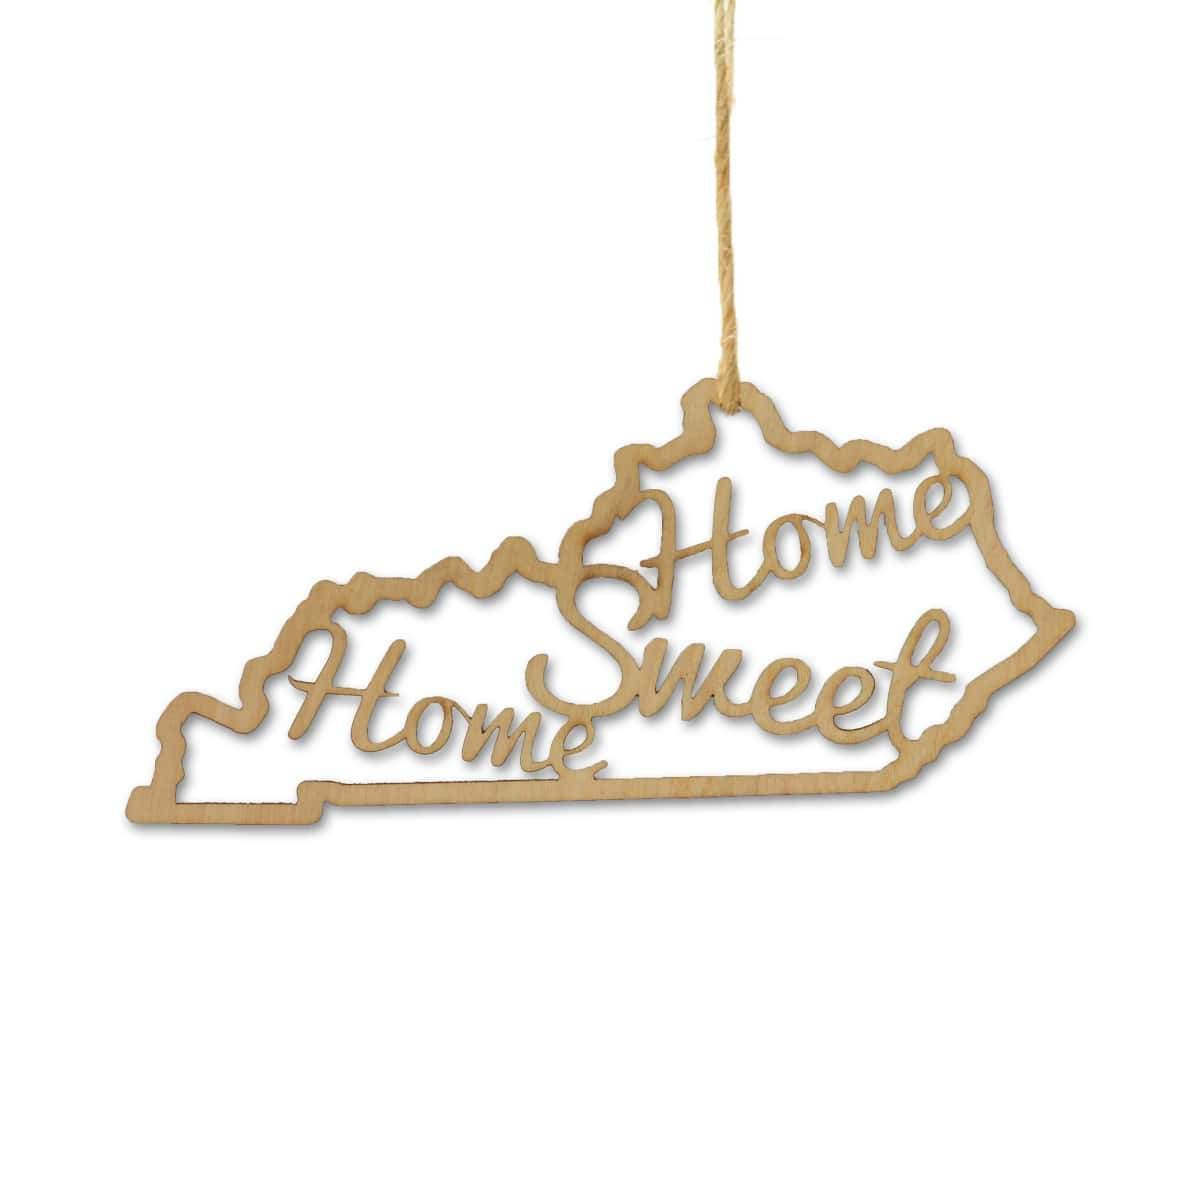 Torched Products Ornaments Kentucky Home Sweet Home Ornaments (781215694965)